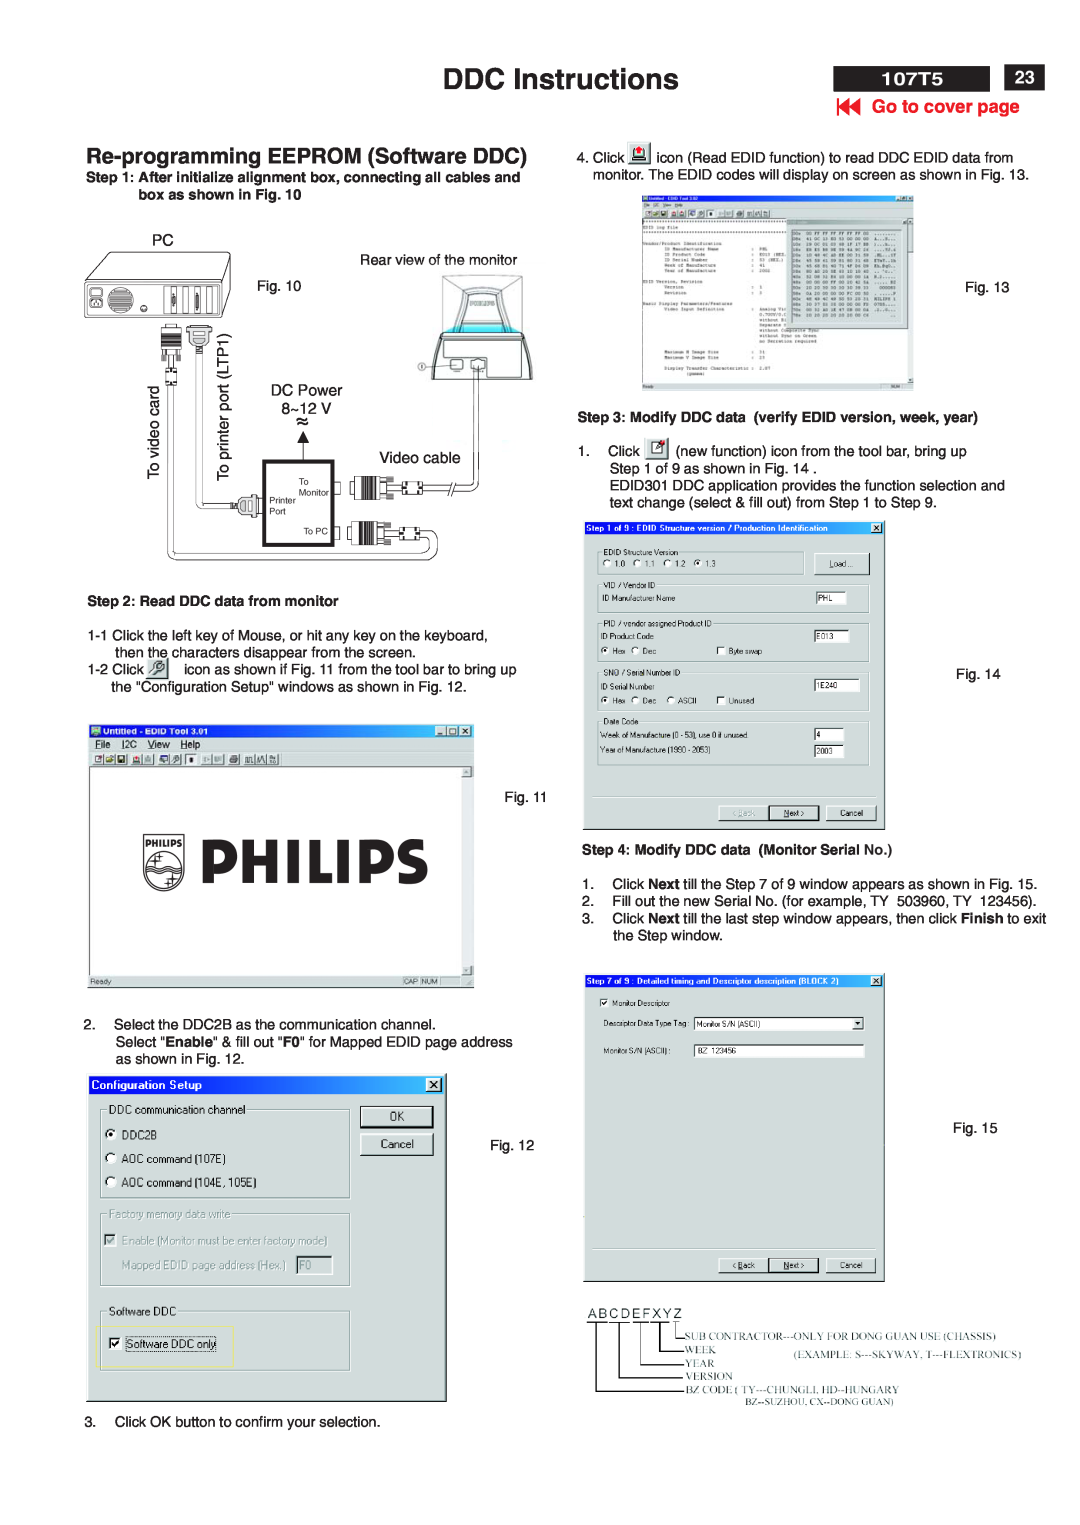 Philips V30 DDC Instructions, Re-programming EEPROM Software DDC, 107T5, Go to cover page, Read DDC data from monitor 